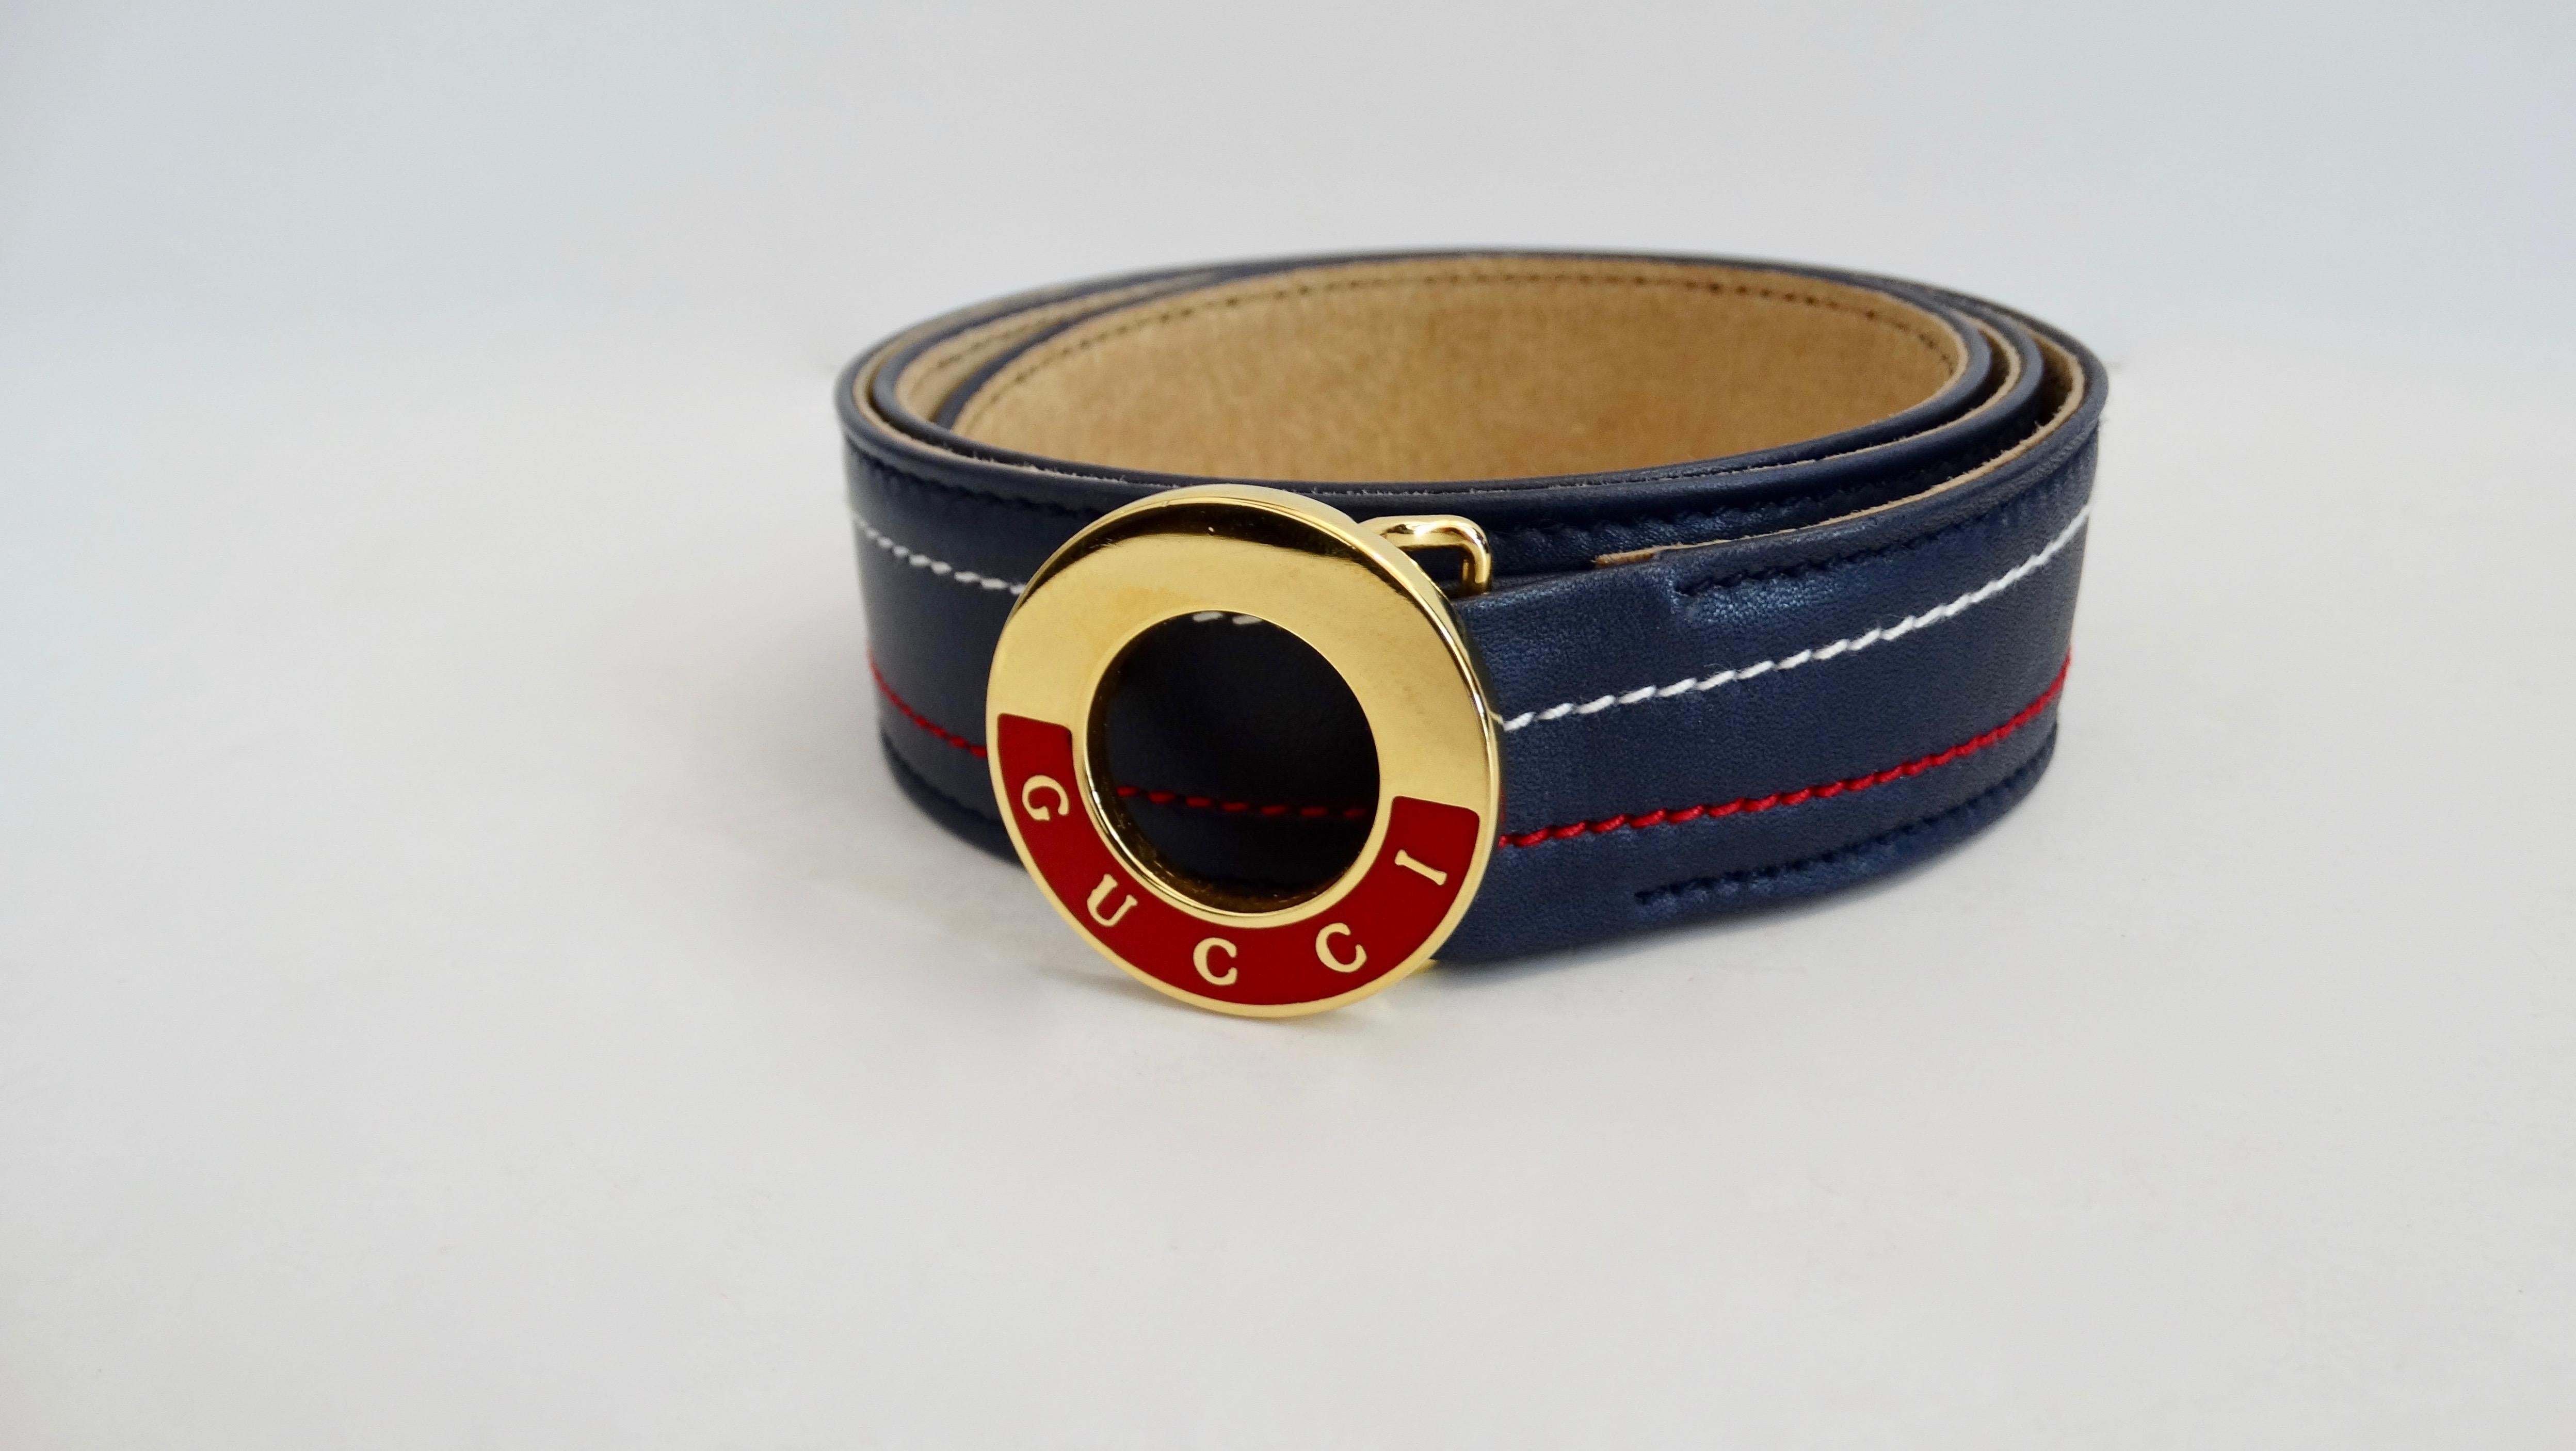 Keep it classic with this Gucci belt! Circa 1980s, this belt is made from navy blue leather and features white and red stitching. Buckle is gold plated with red enamel and is stamped Gucci. Includes 3 peg hole closures. The perfect belt to pair with